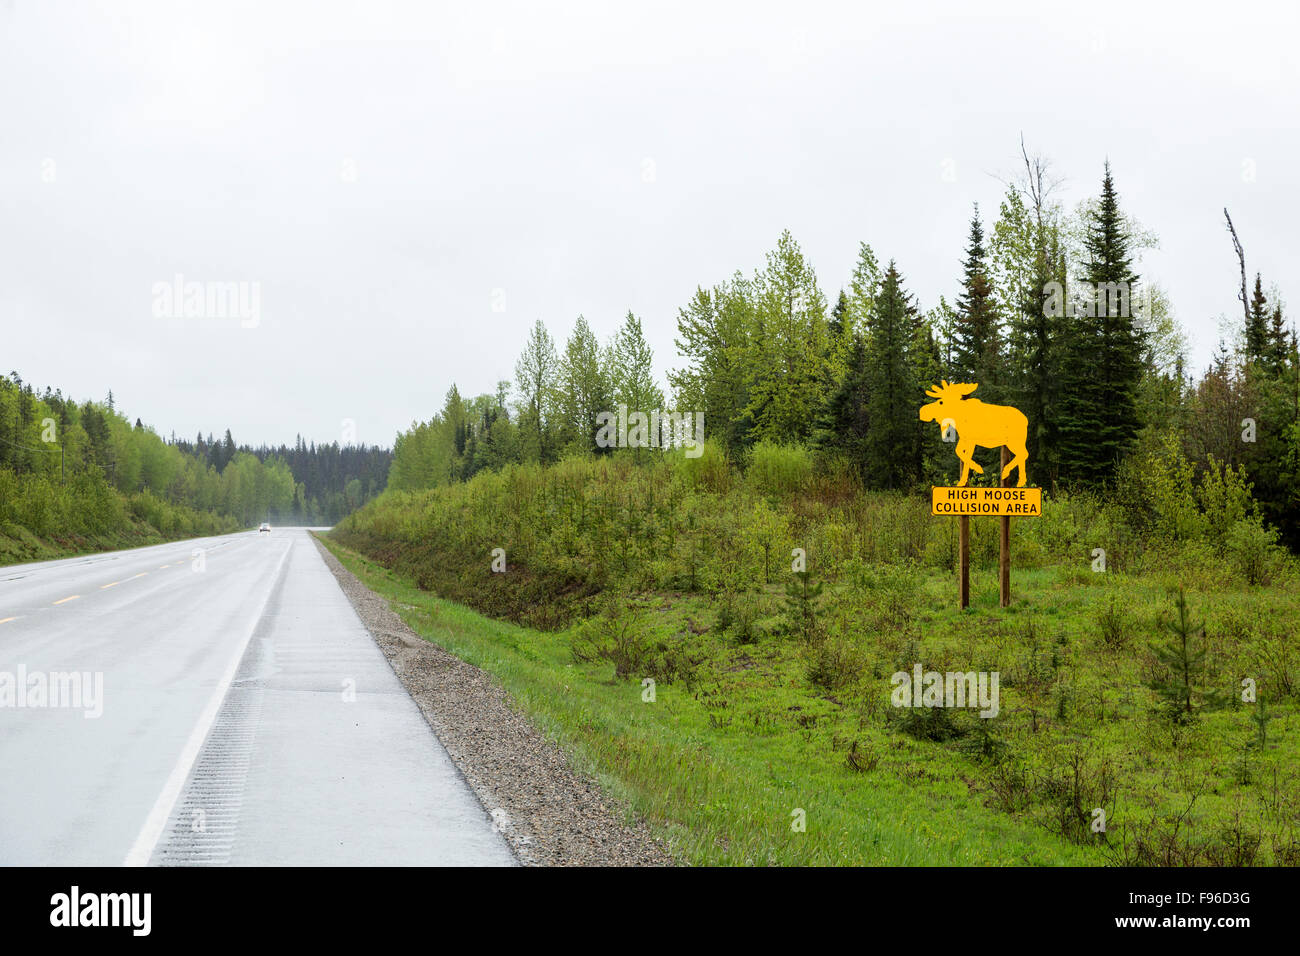 British Columbia, Canada, Highway sign, moose sign, Highway 16, Robson Valley, Stock Photo